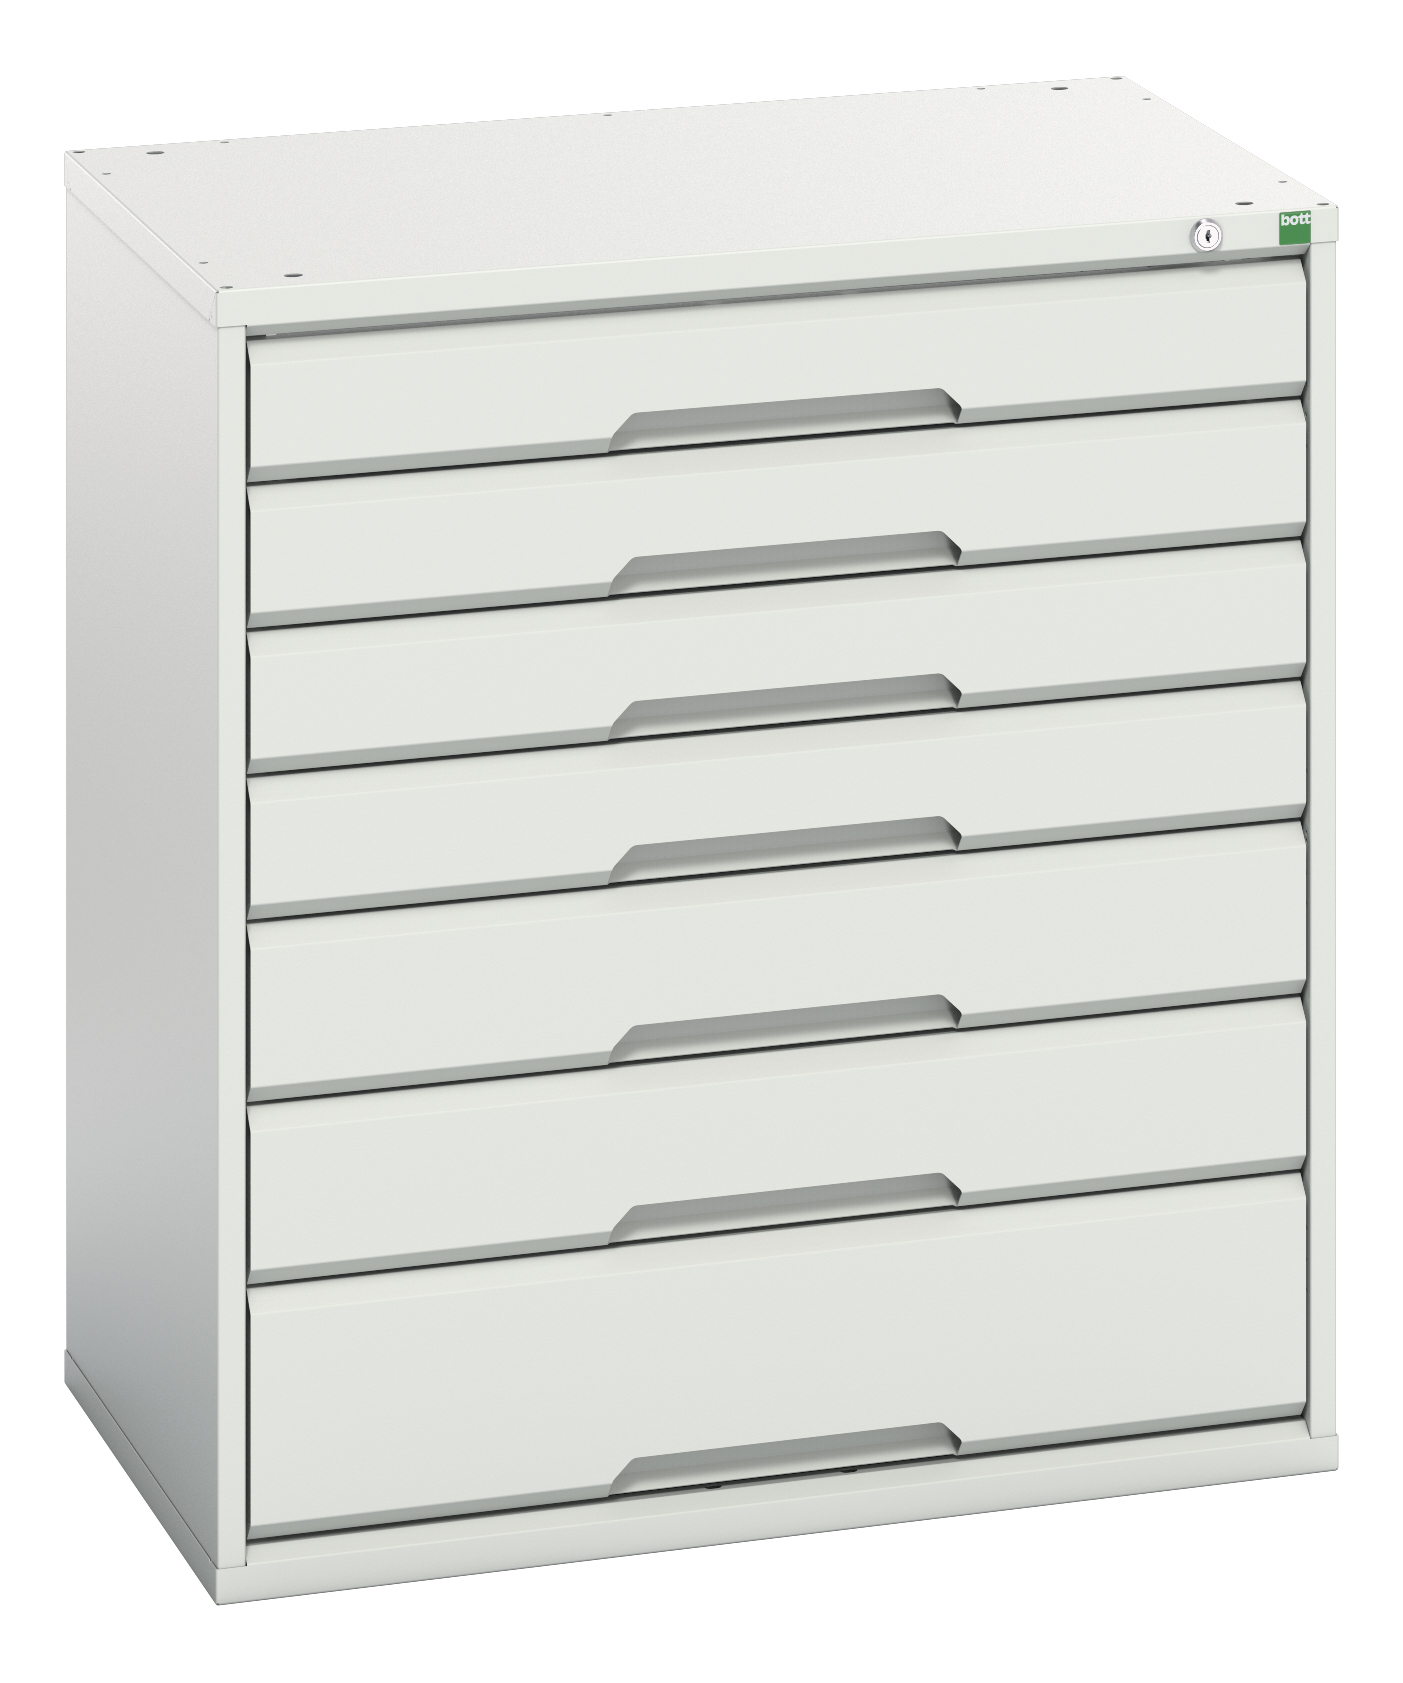 Bott Verso Drawer Cabinet With 7 Drawers - 16925129.16